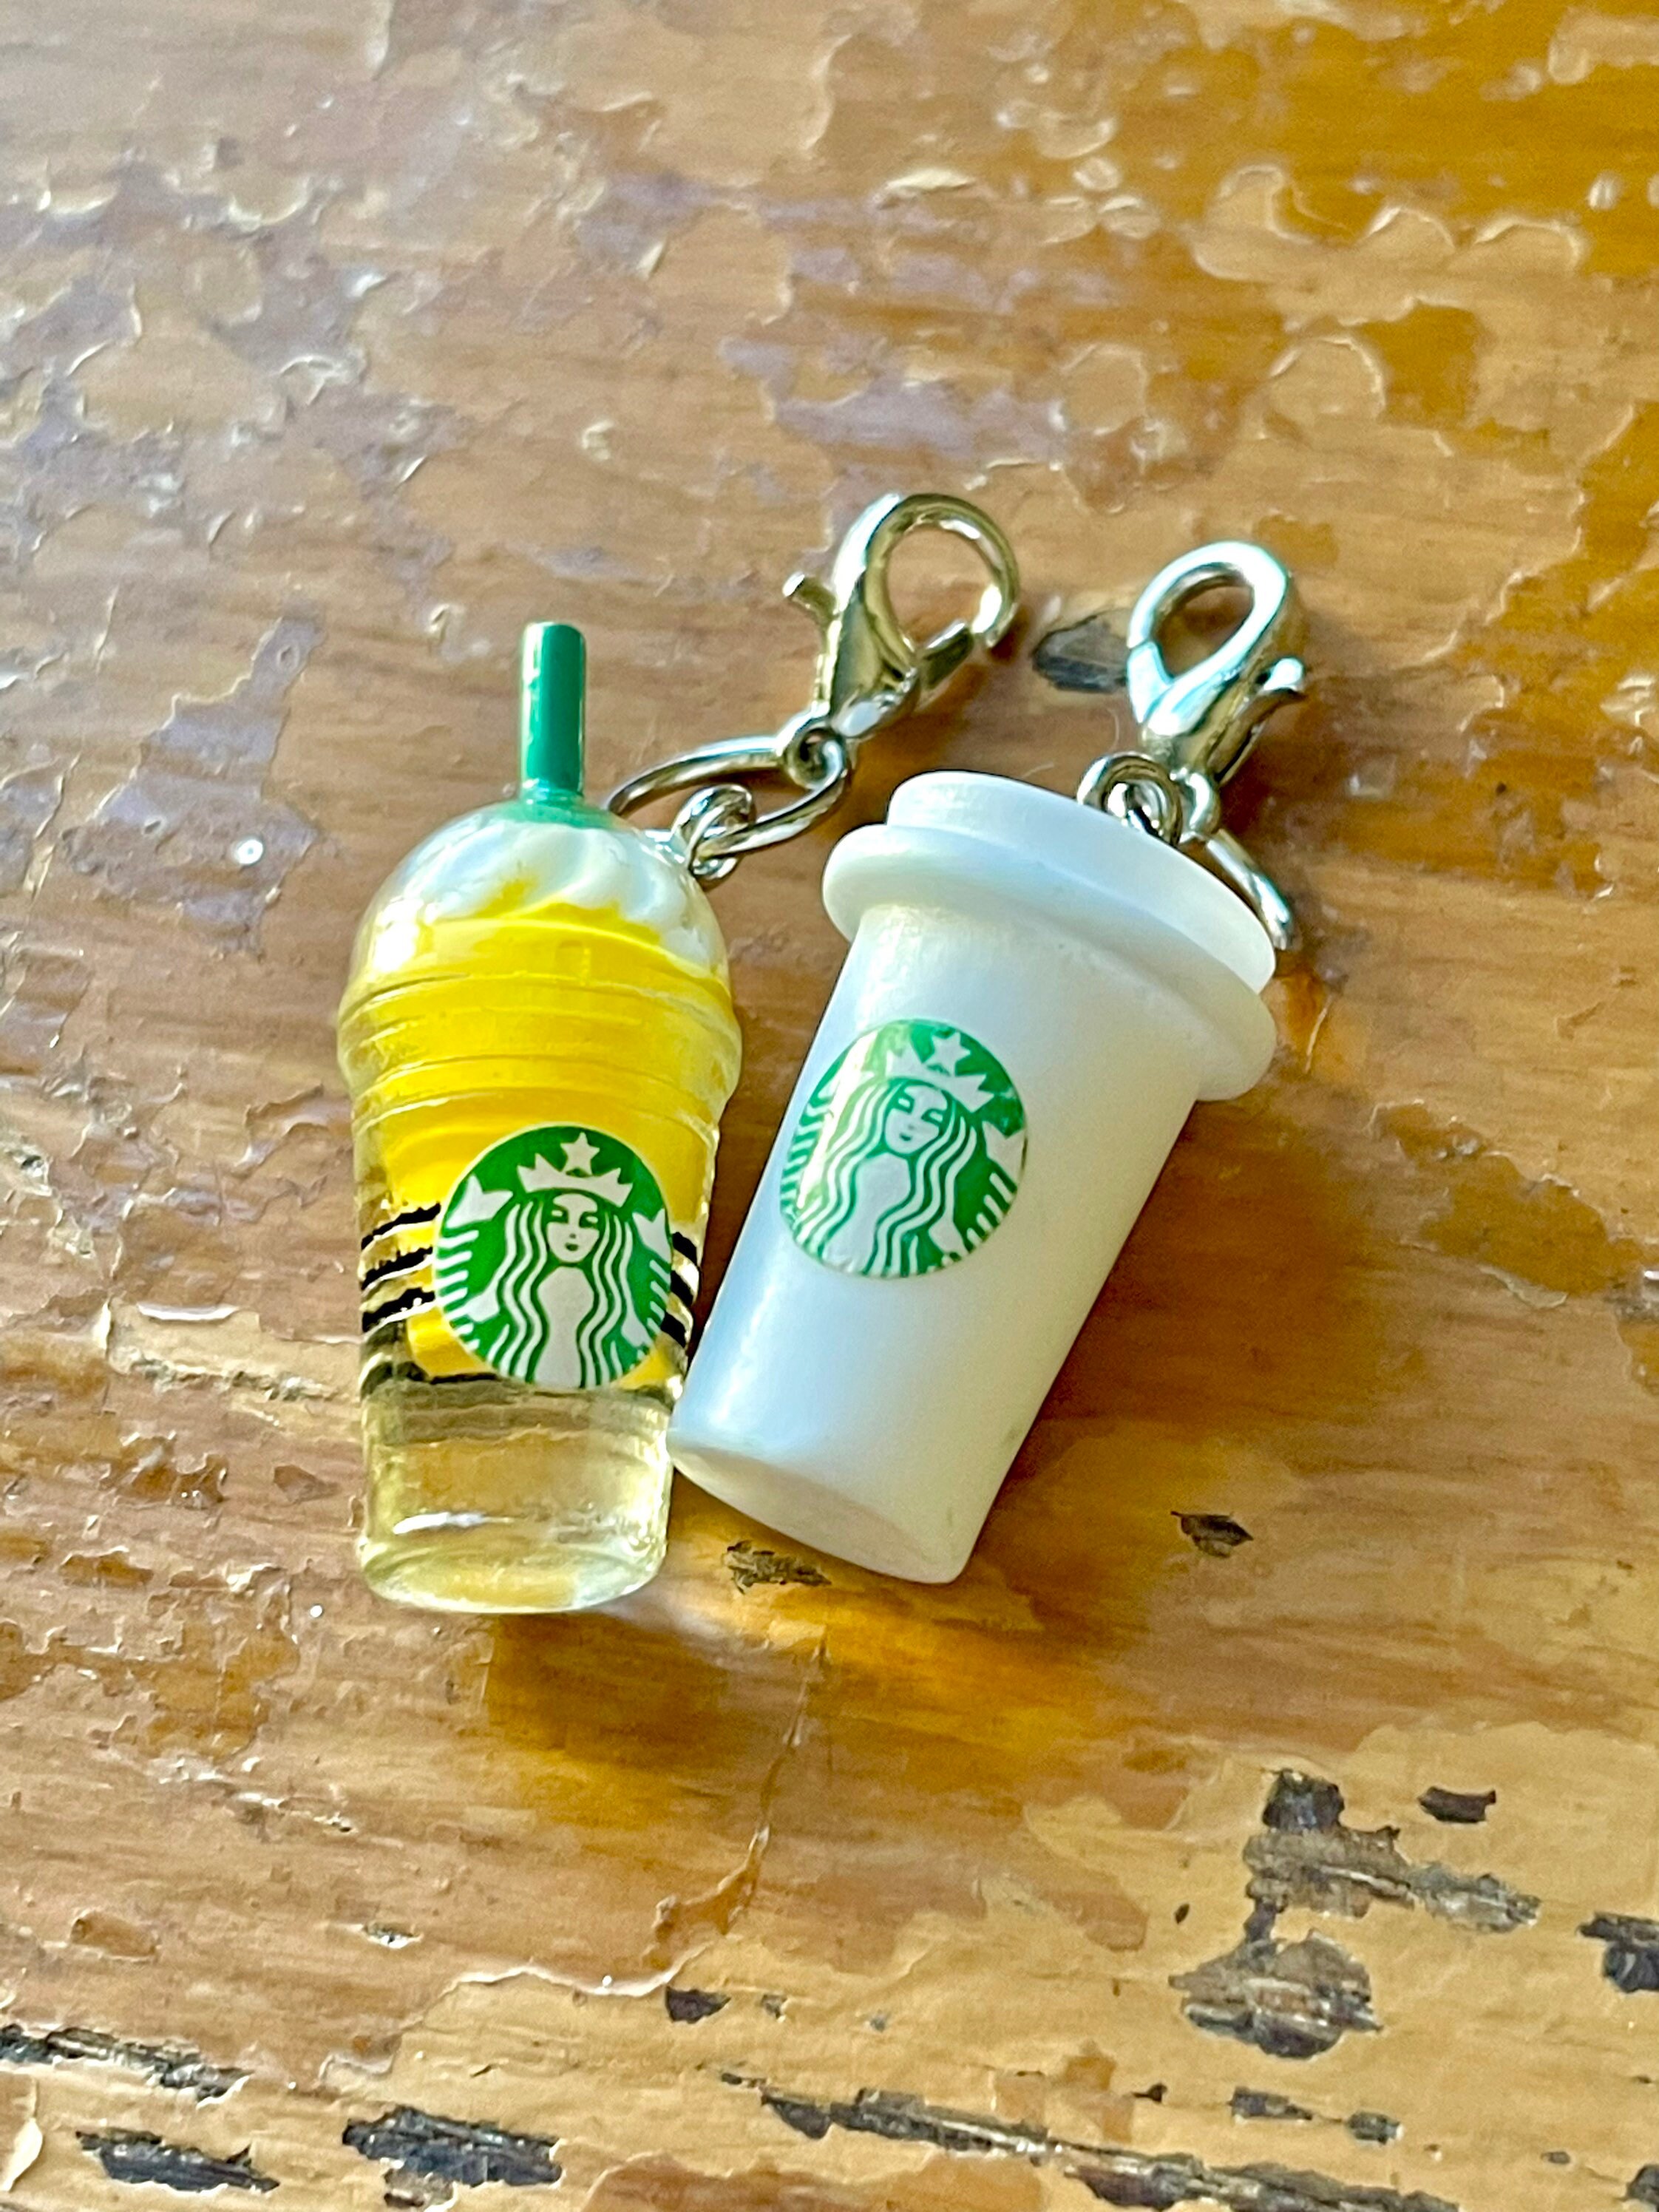 Free: Handmade Polymer Clay Starbucks Charms - Charms -  Auctions  for Free Stuff